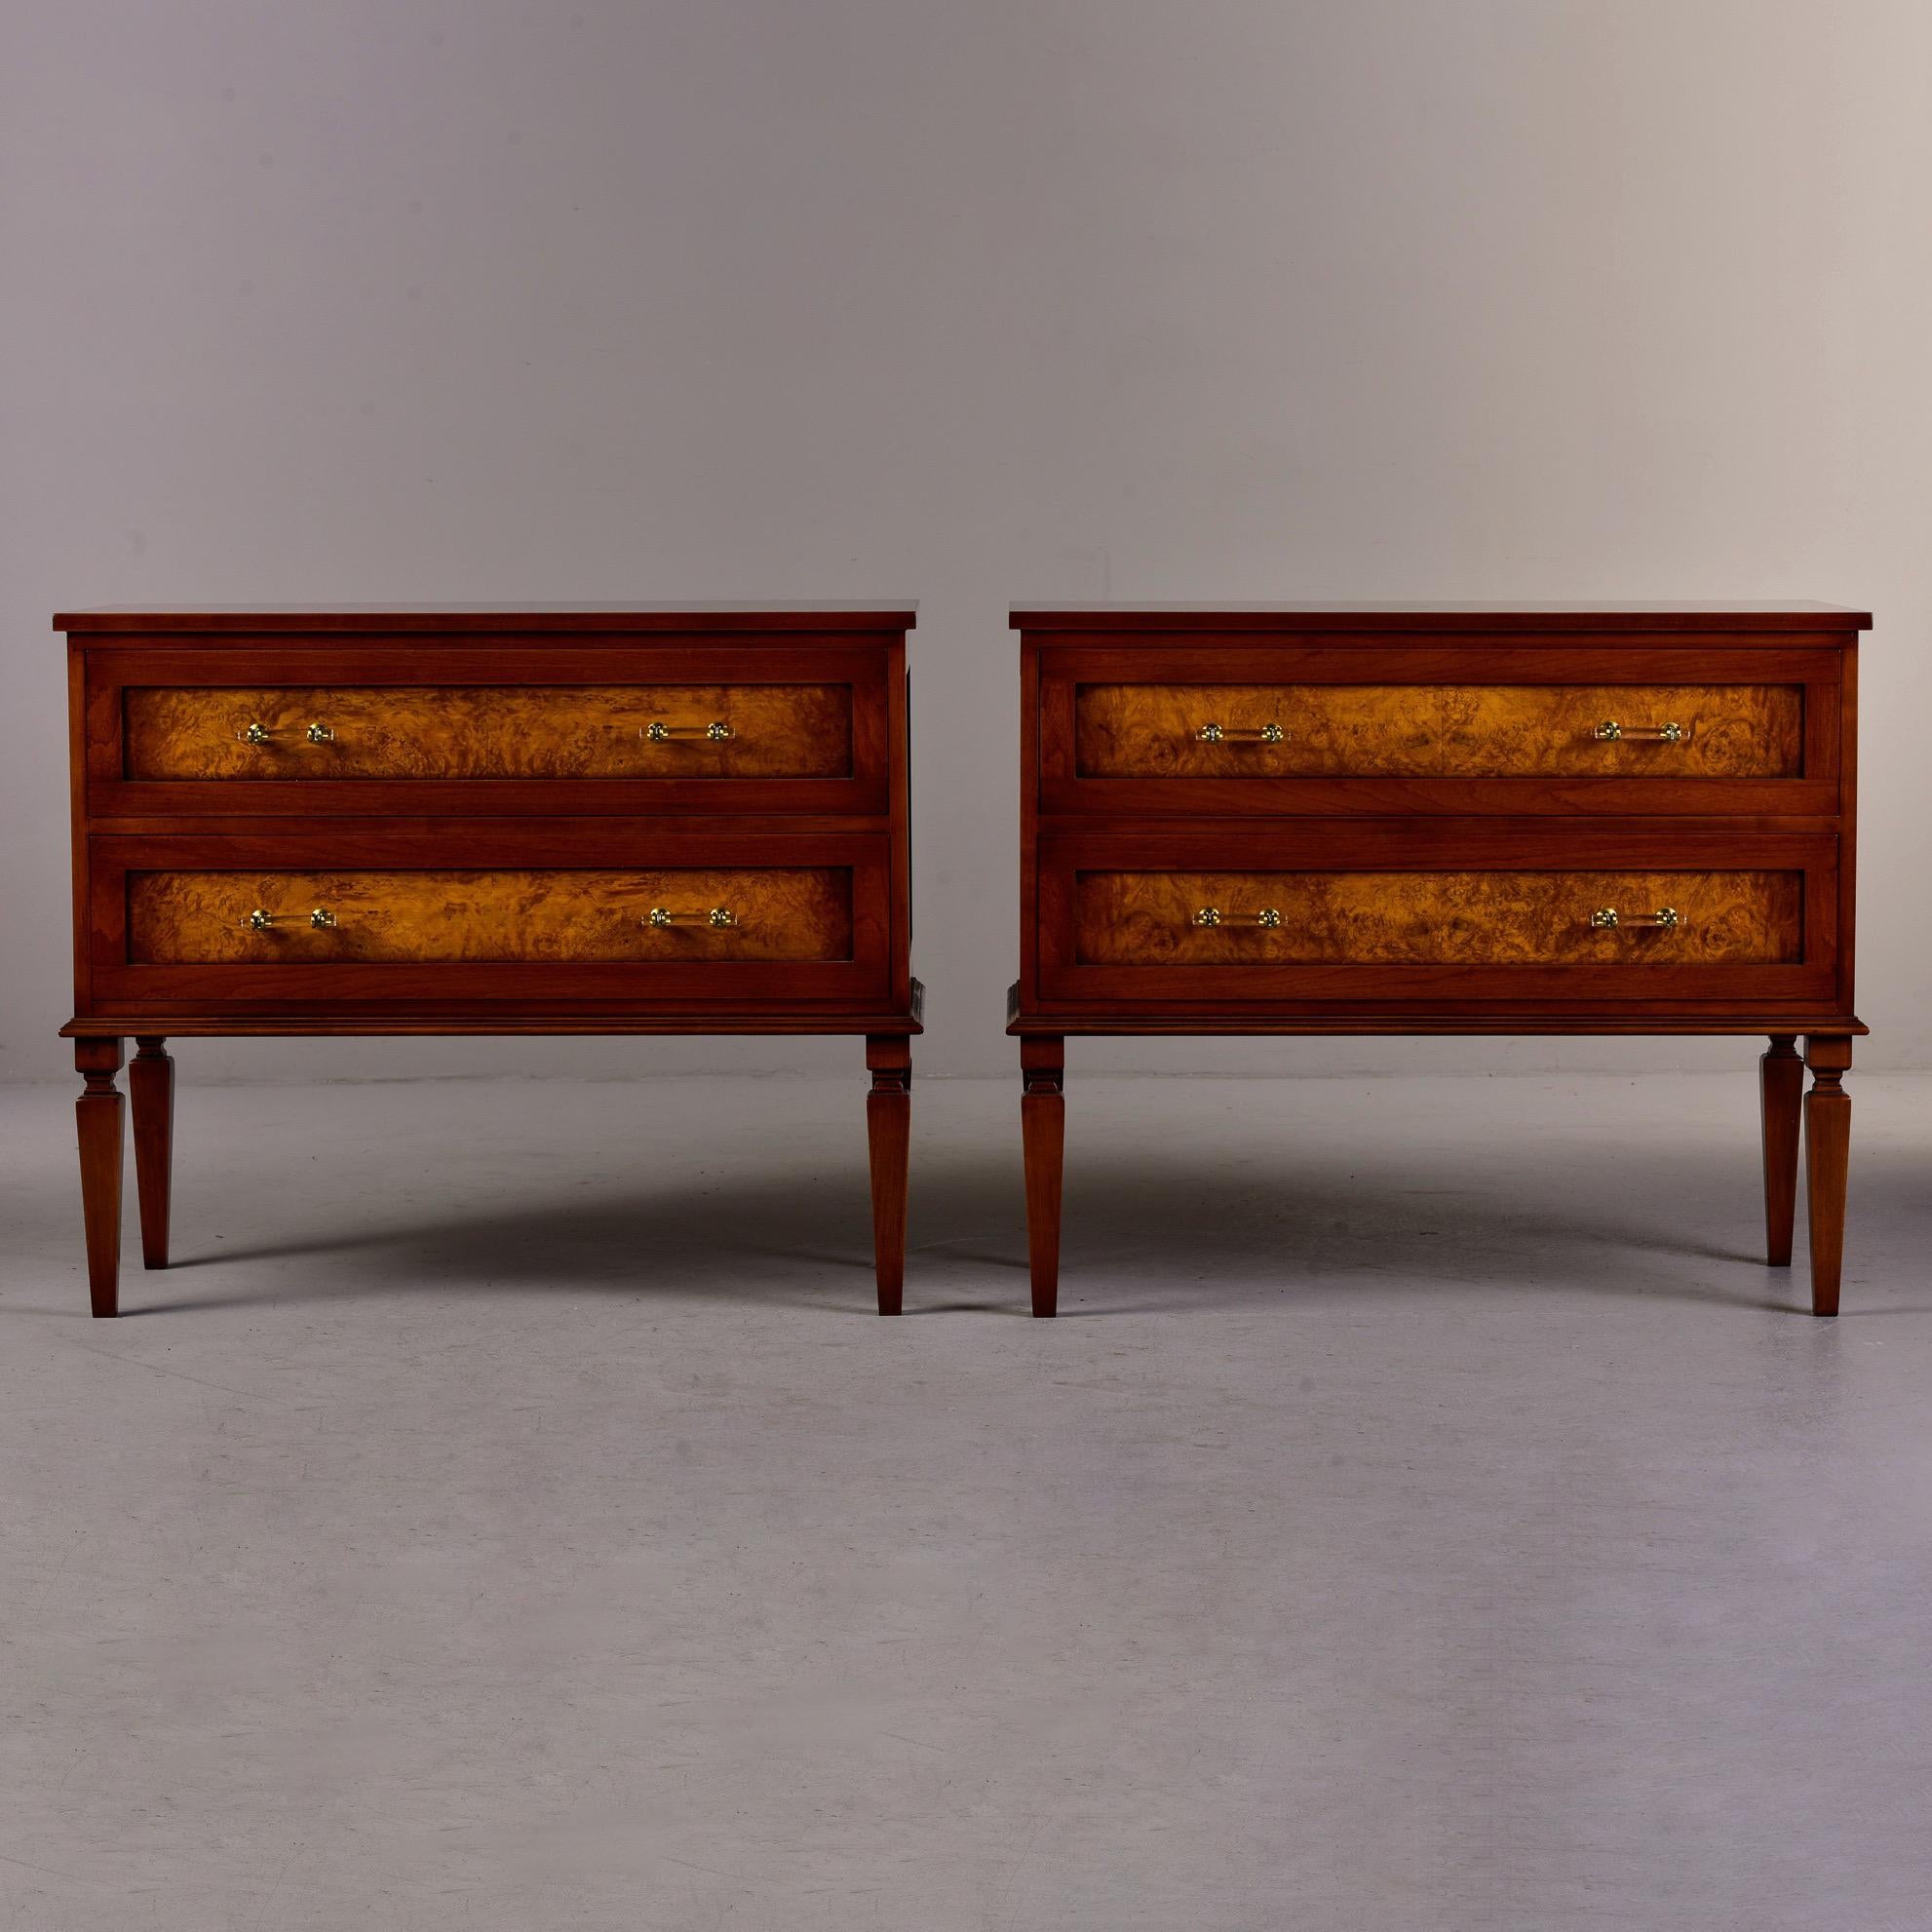 This pair of two drawer walnut chests was custom made for us in England. Classic lines with dovetail construction, contrasting burlwood drawer fronts, lucite and brass hardware and tapered legs. Versatile size can be used for bedside cabinets or to